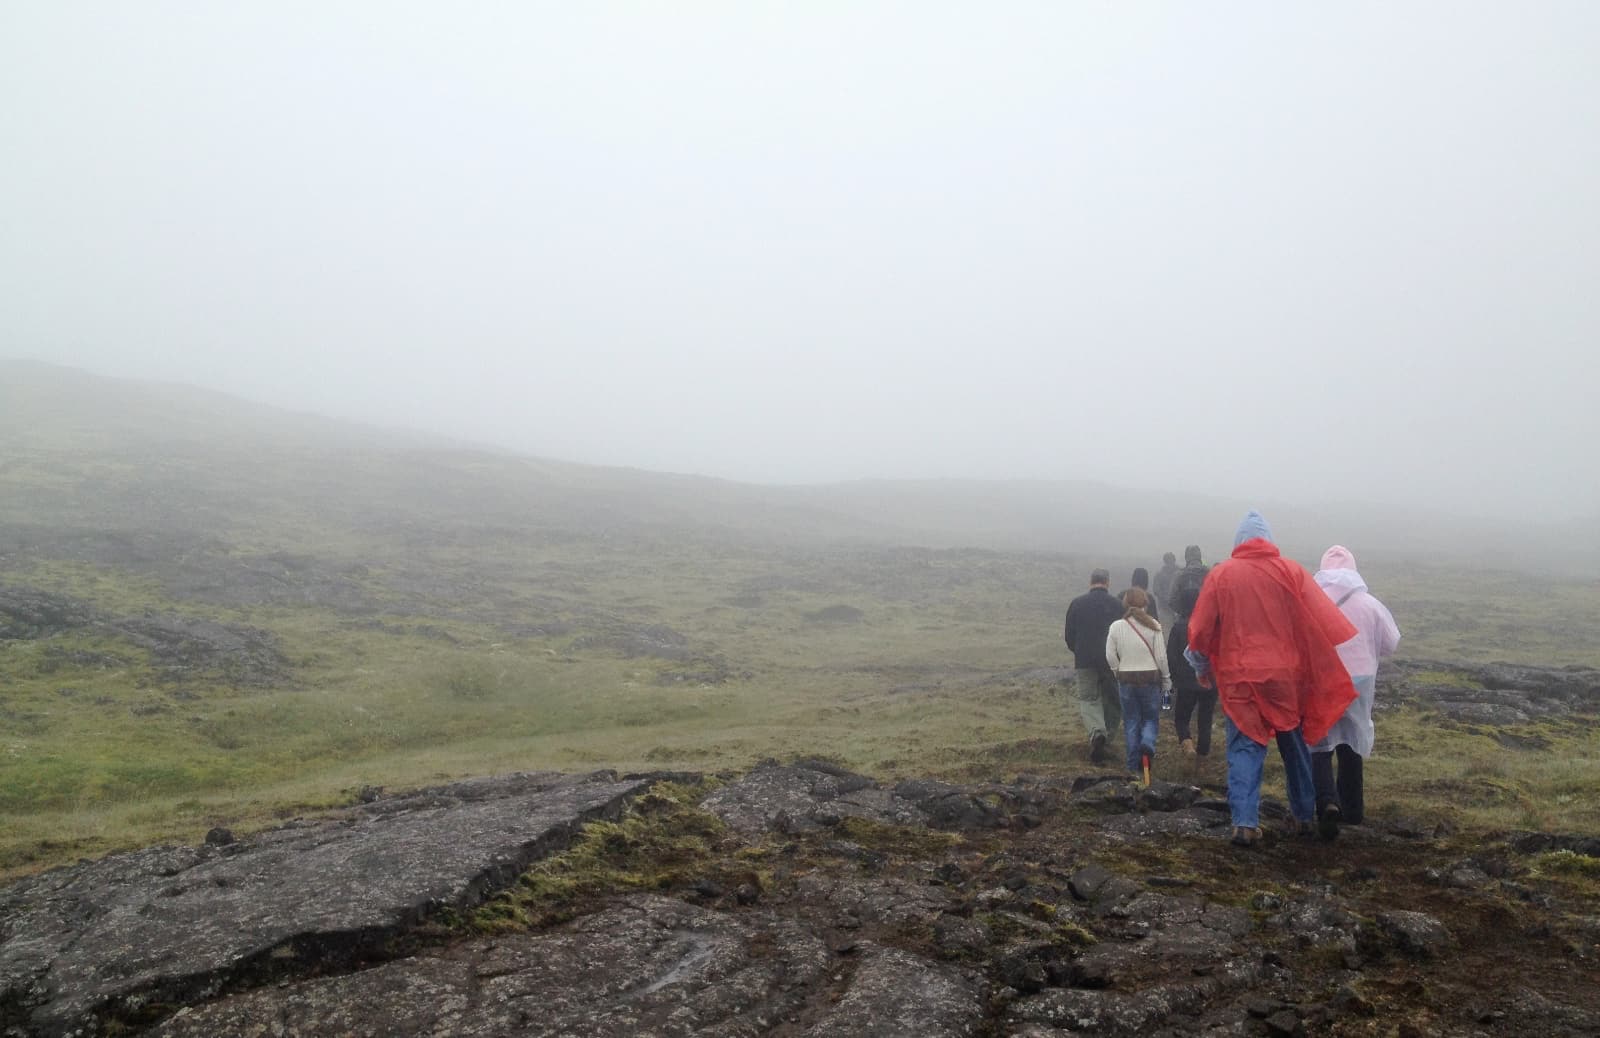 A cluster of people walking across rugged rocky and mossy terrain, with hazy moist skies in the distance